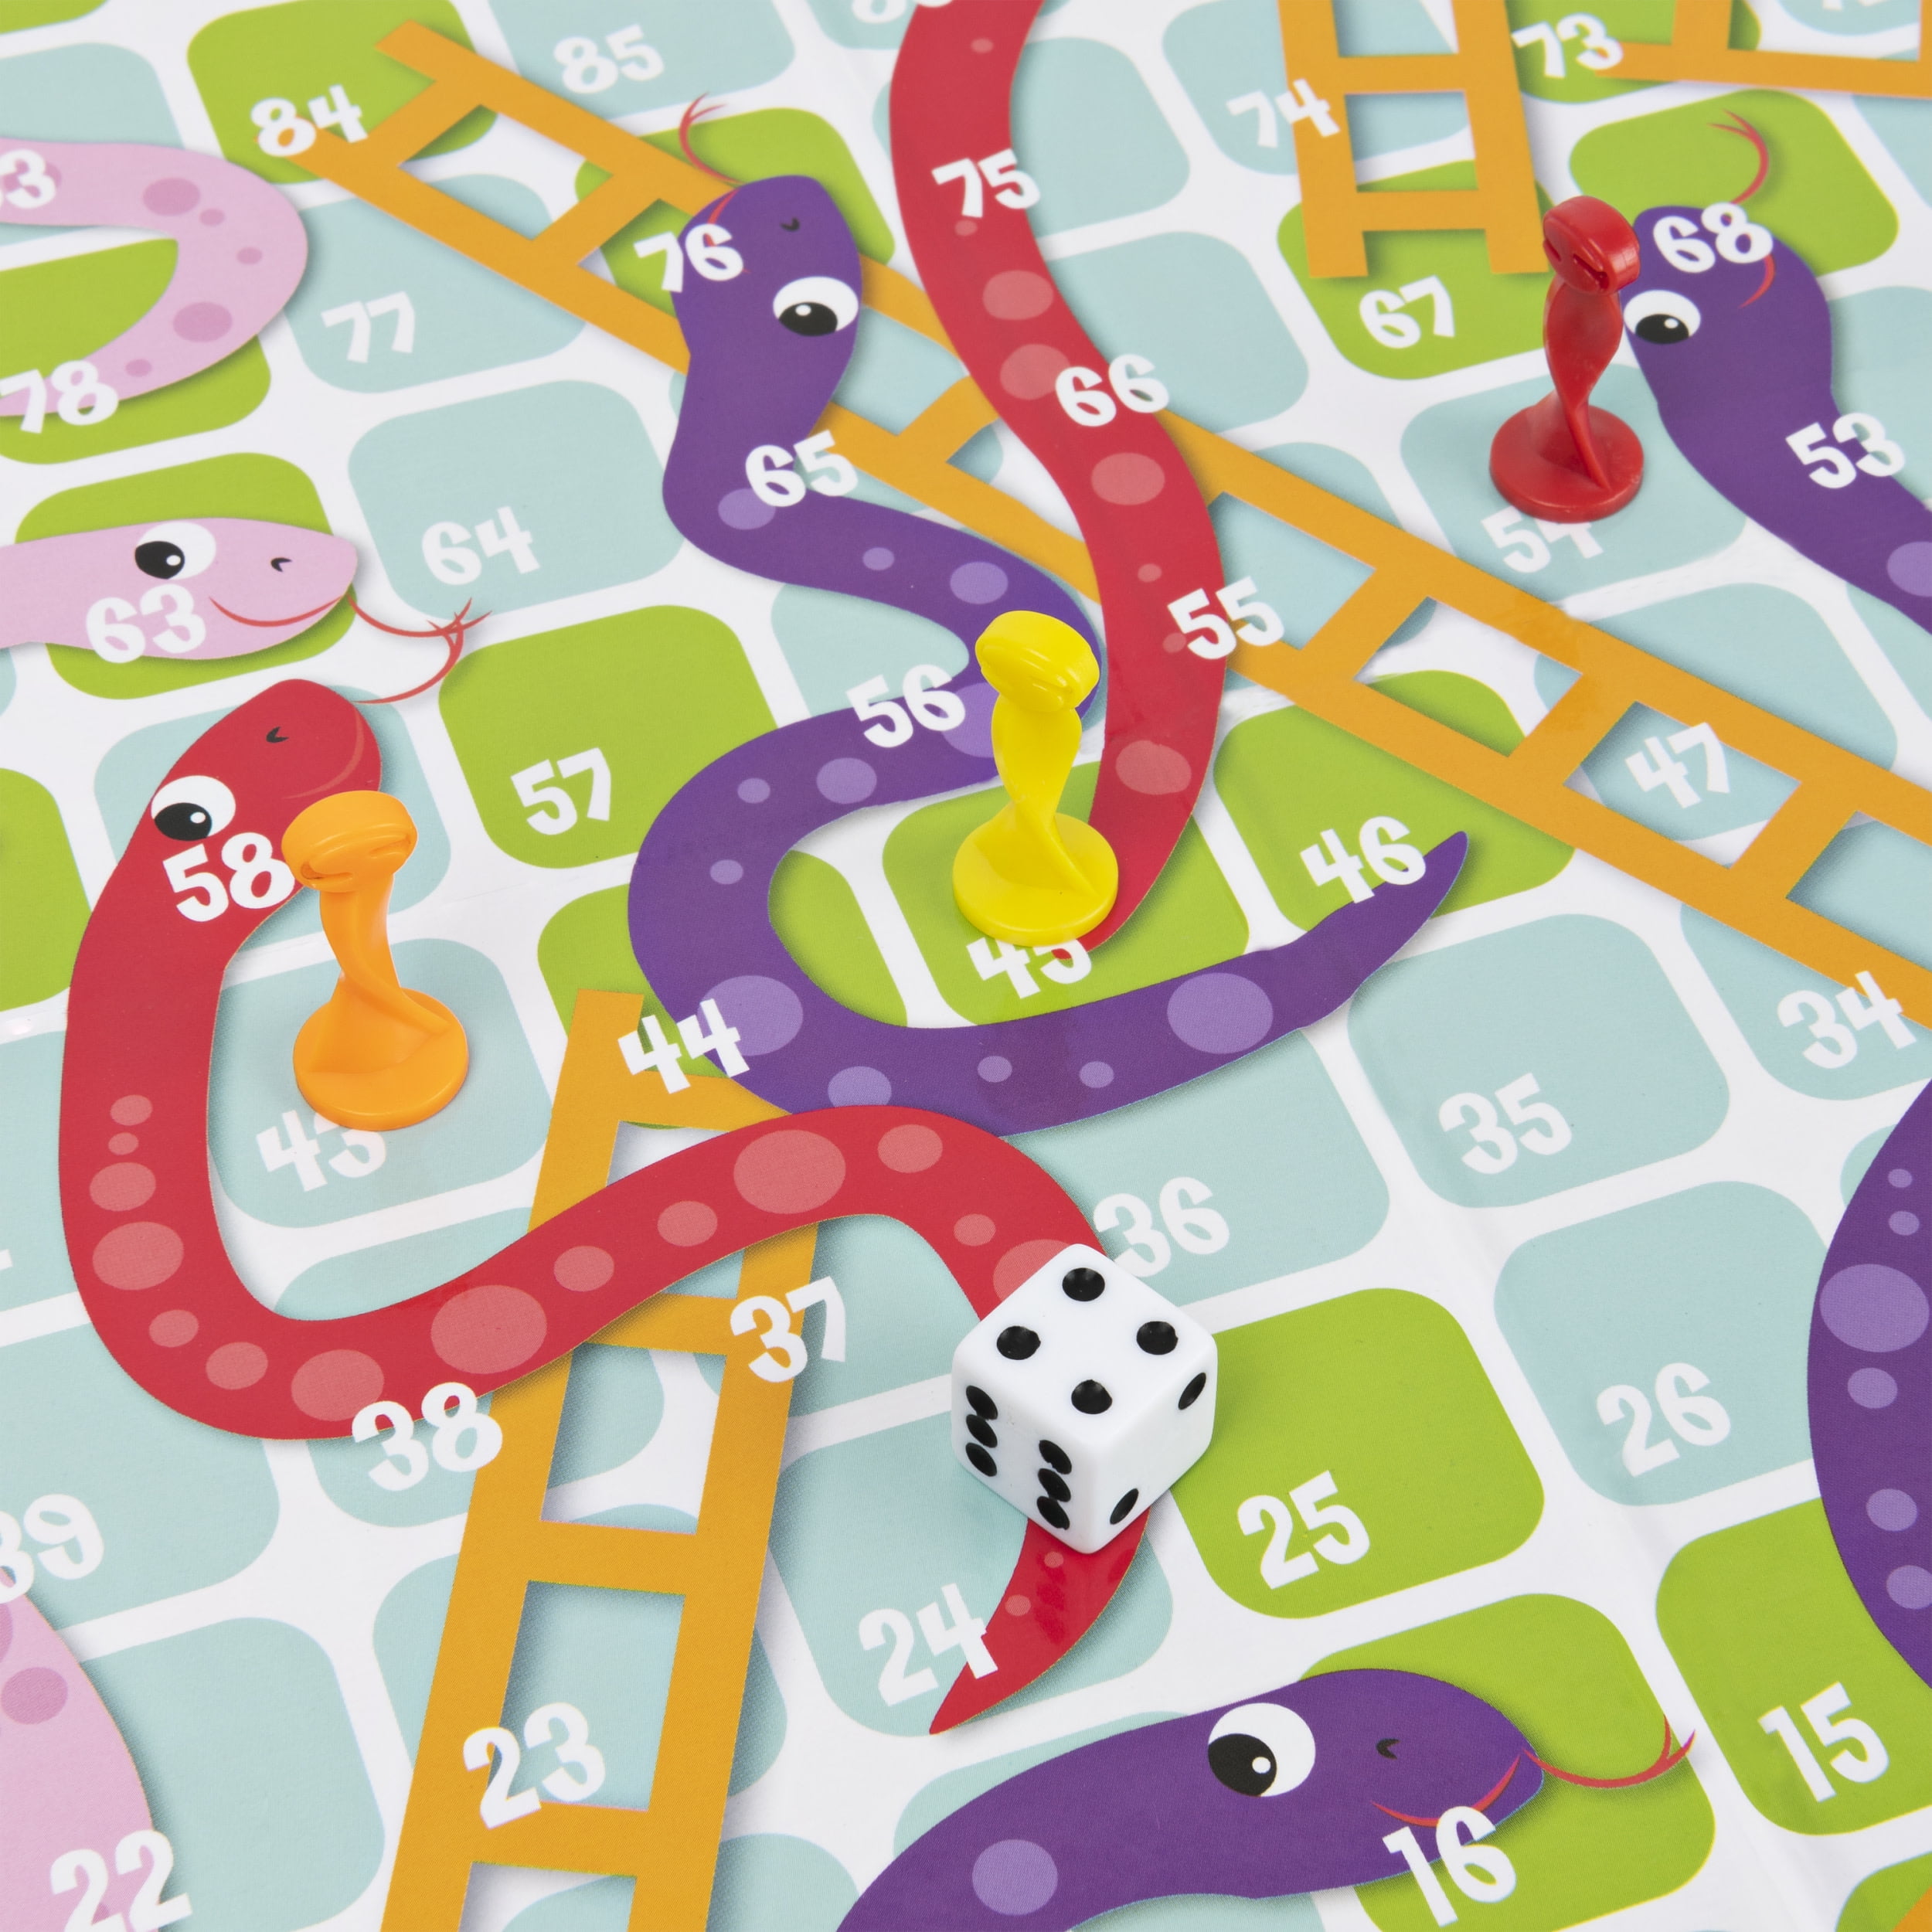 Snakes And Ladders 2 - Online Game - Play for Free